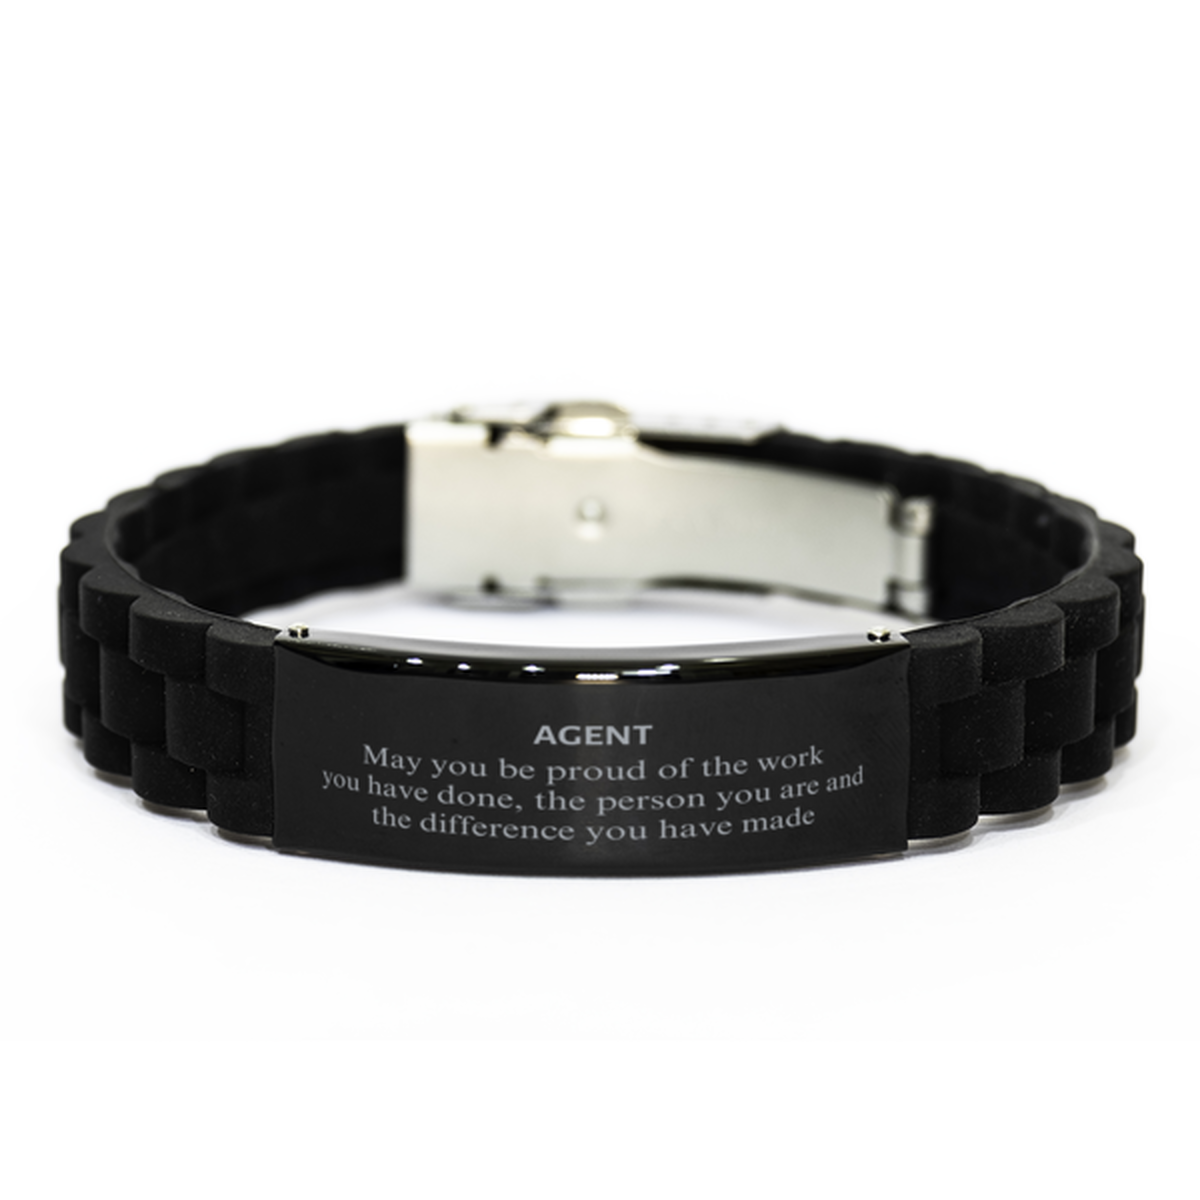 Agent May you be proud of the work you have done, Retirement Agent Black Glidelock Clasp Bracelet for Colleague Appreciation Gifts Amazing for Agent